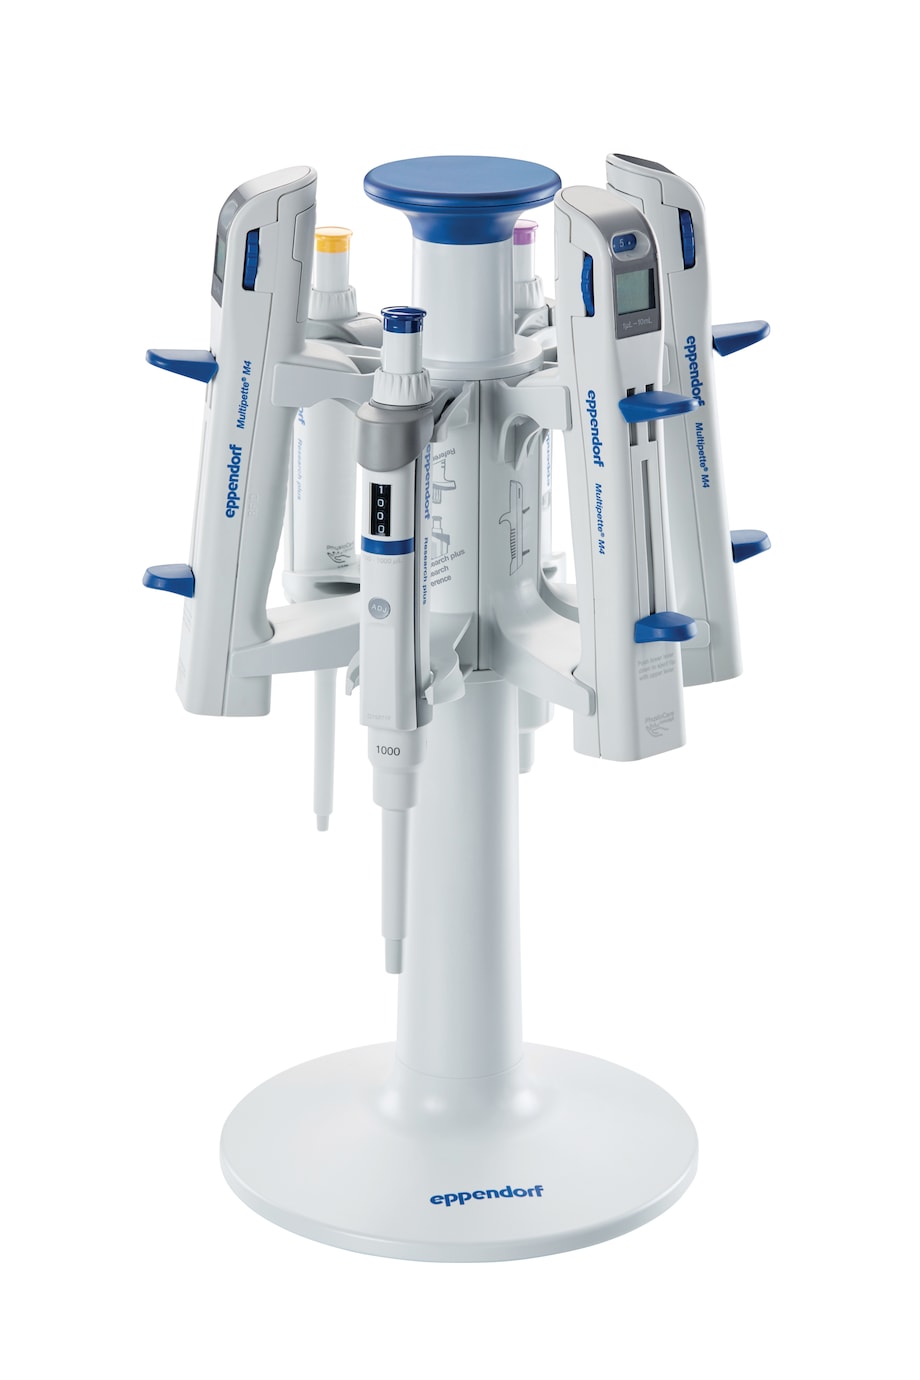 Store your Multipette_REG__NBSP_M4 multi-dispenser securely on a Pipette Carousel 2 or Charger Carousel 2 by Eppendorf